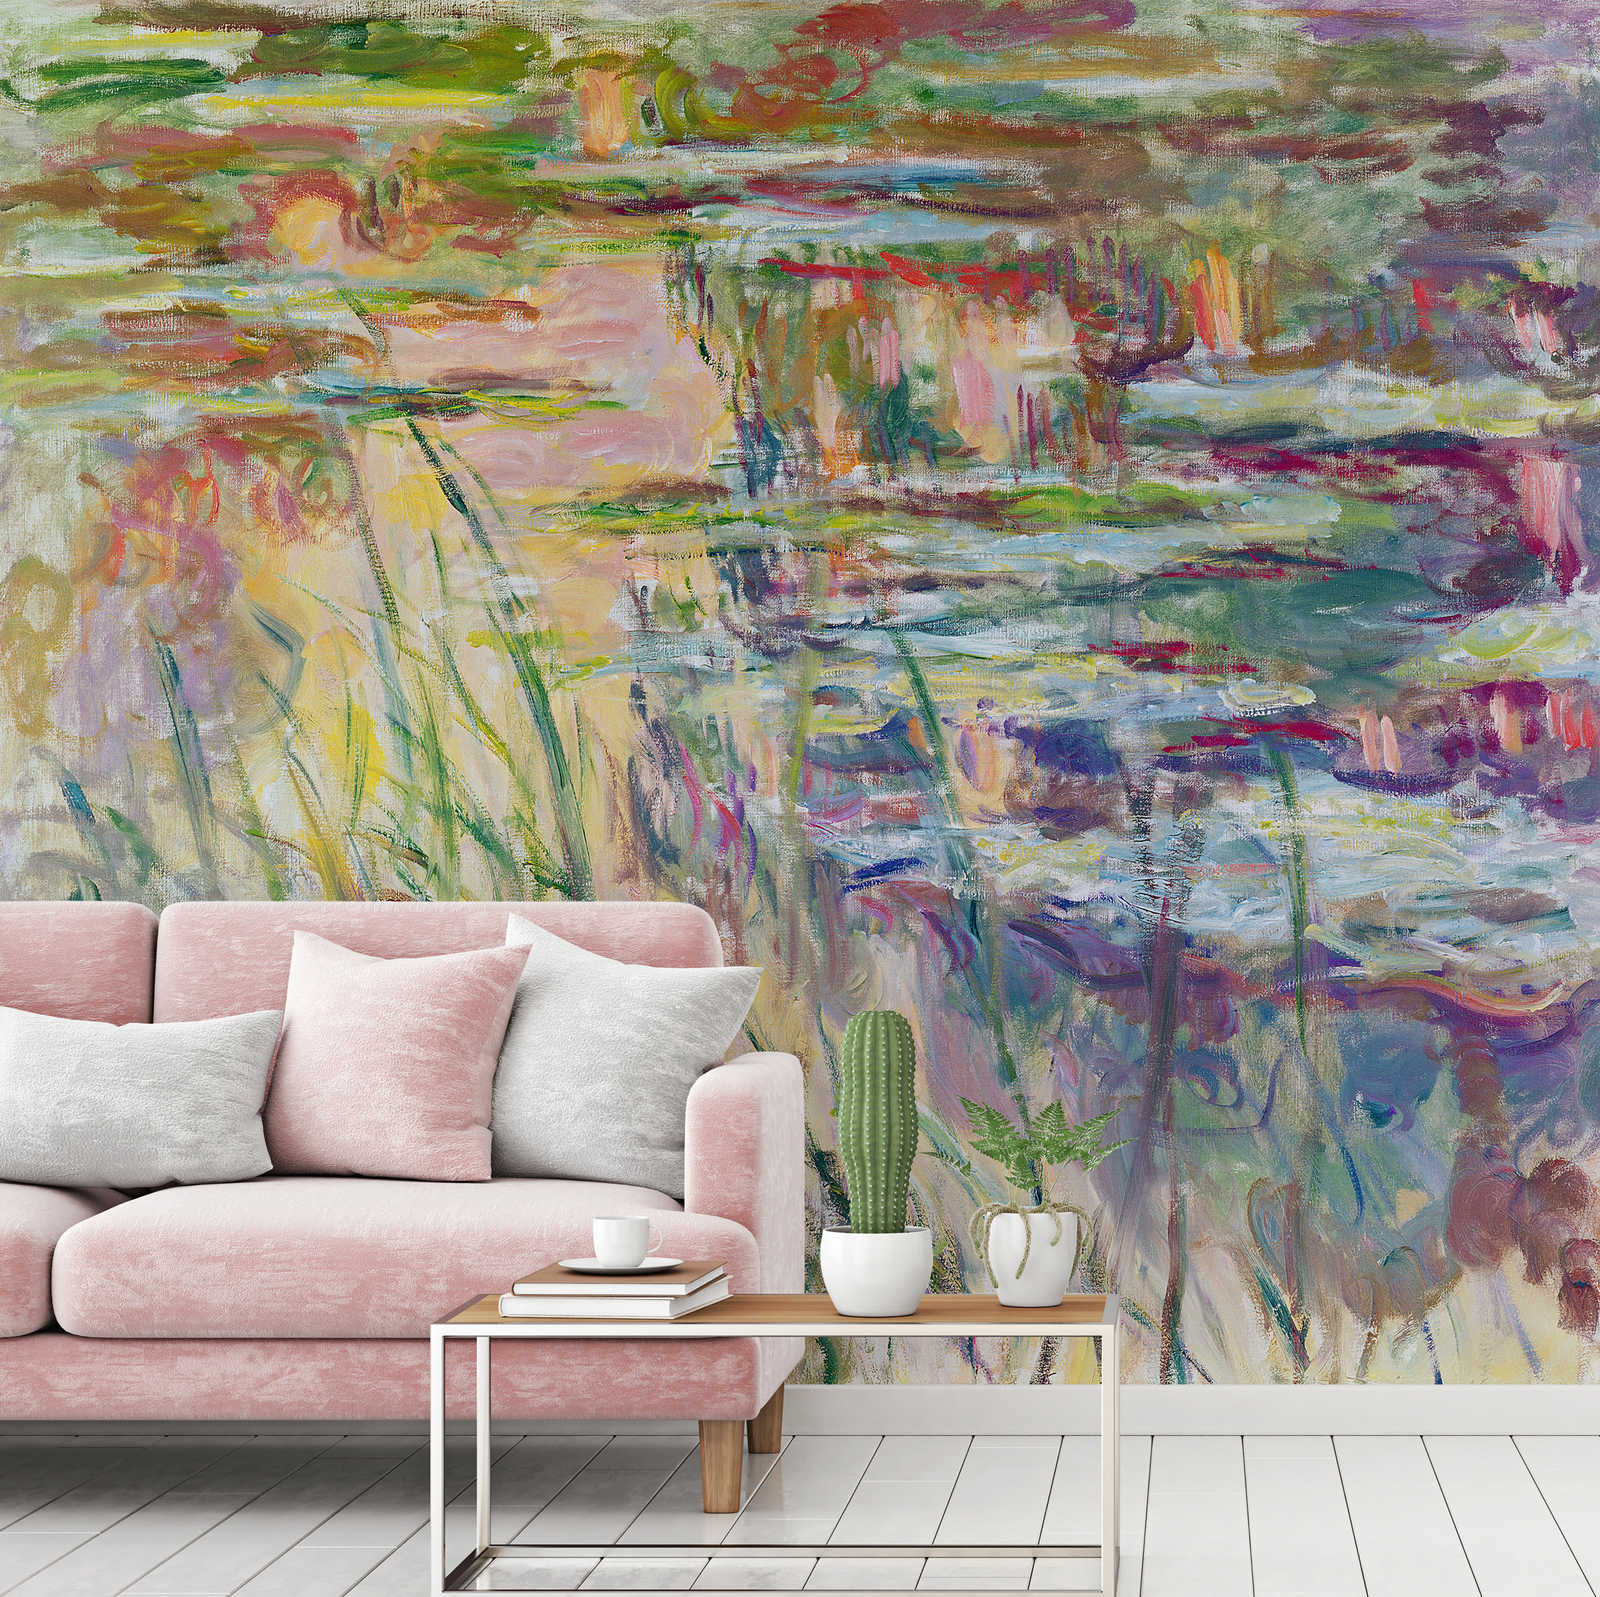             Photo wallpaper "Reflections on the water" by Claude Monet
        